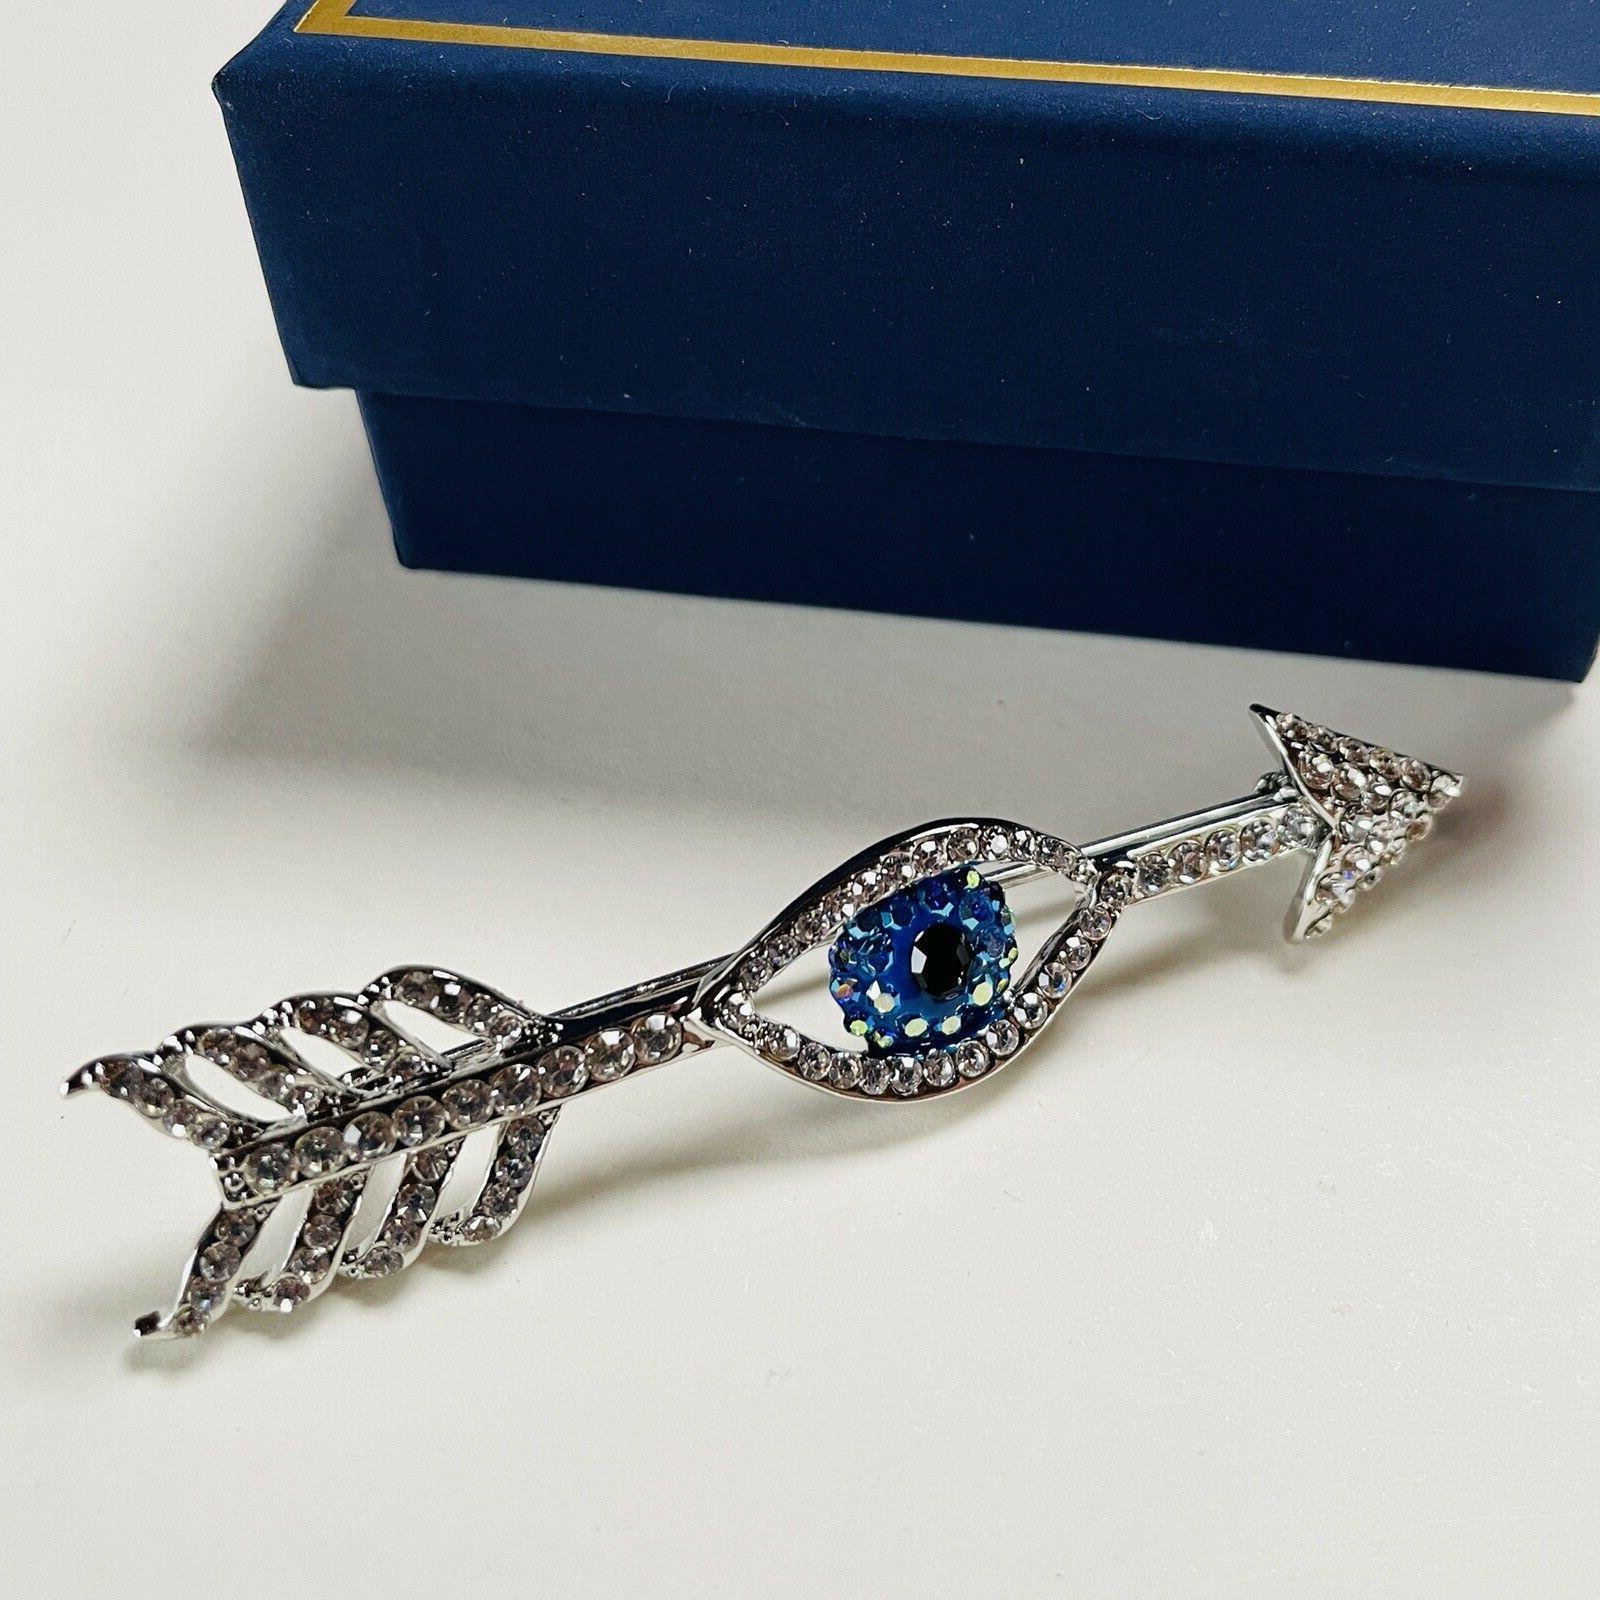 Awesome Signed Butler & Wilson Eye and Arrow Brooch. Hand set with Sparkling blue and clear Crystals. Silver plated mounting. Measuring approx. 3” long. Original Box. A piece you’ll turn to time and again…The perfect accessory for the Modern Woman! 
